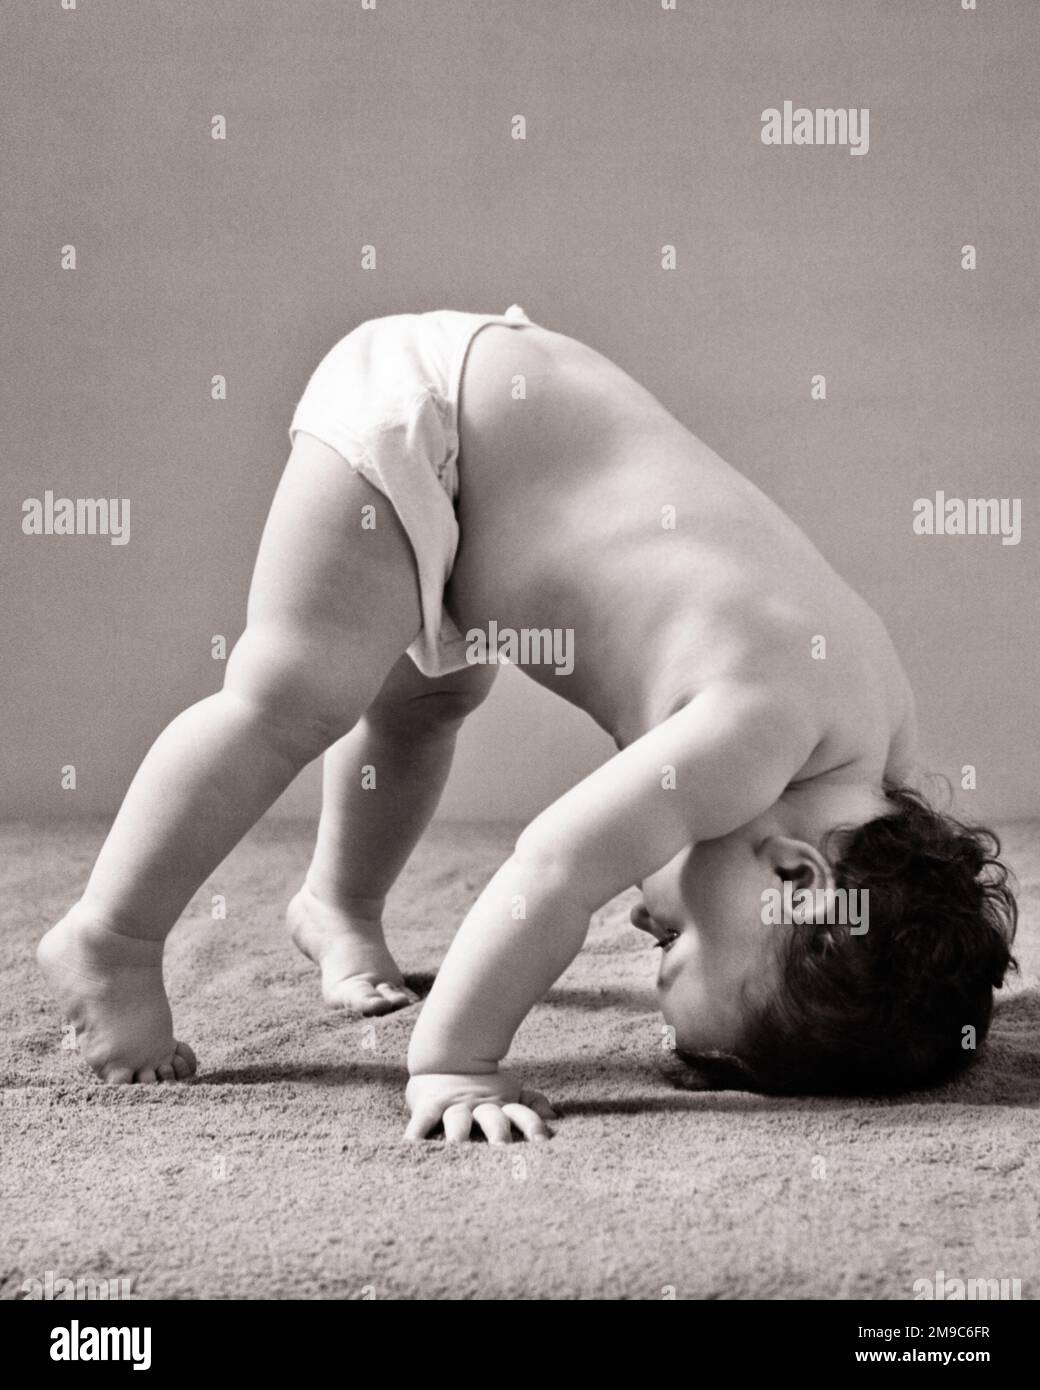 1940s BABY ON TIPTOES HEAD TOUCHING THE FLOOR LOOKING BACK TO FEET BABY YOGA DOWNWARD DOG POSE WEARING JUST UNDERPANTS - b20205 HAR001 HARS INFANT LIFESTYLE FEMALES WINNING STUDIO SHOT HOME LIFE COPY SPACE FULL-LENGTH PHYSICAL FITNESS JUST CONFIDENCE B&W BRUNETTE ACTIVITY HUMOROUS PHYSICAL UNDERPANTS FLEXIBLE STRENGTH RECREATION COMICAL DIRECTION COMEDY FLEXIBILITY MUSCLES DOWNWARD PLEASANT YOGA AGREEABLE CHARMING GROWTH JUVENILES LOVABLE PLEASING POSE TIPTOES ADORABLE AGILE APPEALING BABY GIRL BLACK AND WHITE CAUCASIAN ETHNICITY HAR001 OLD FASHIONED Stock Photo